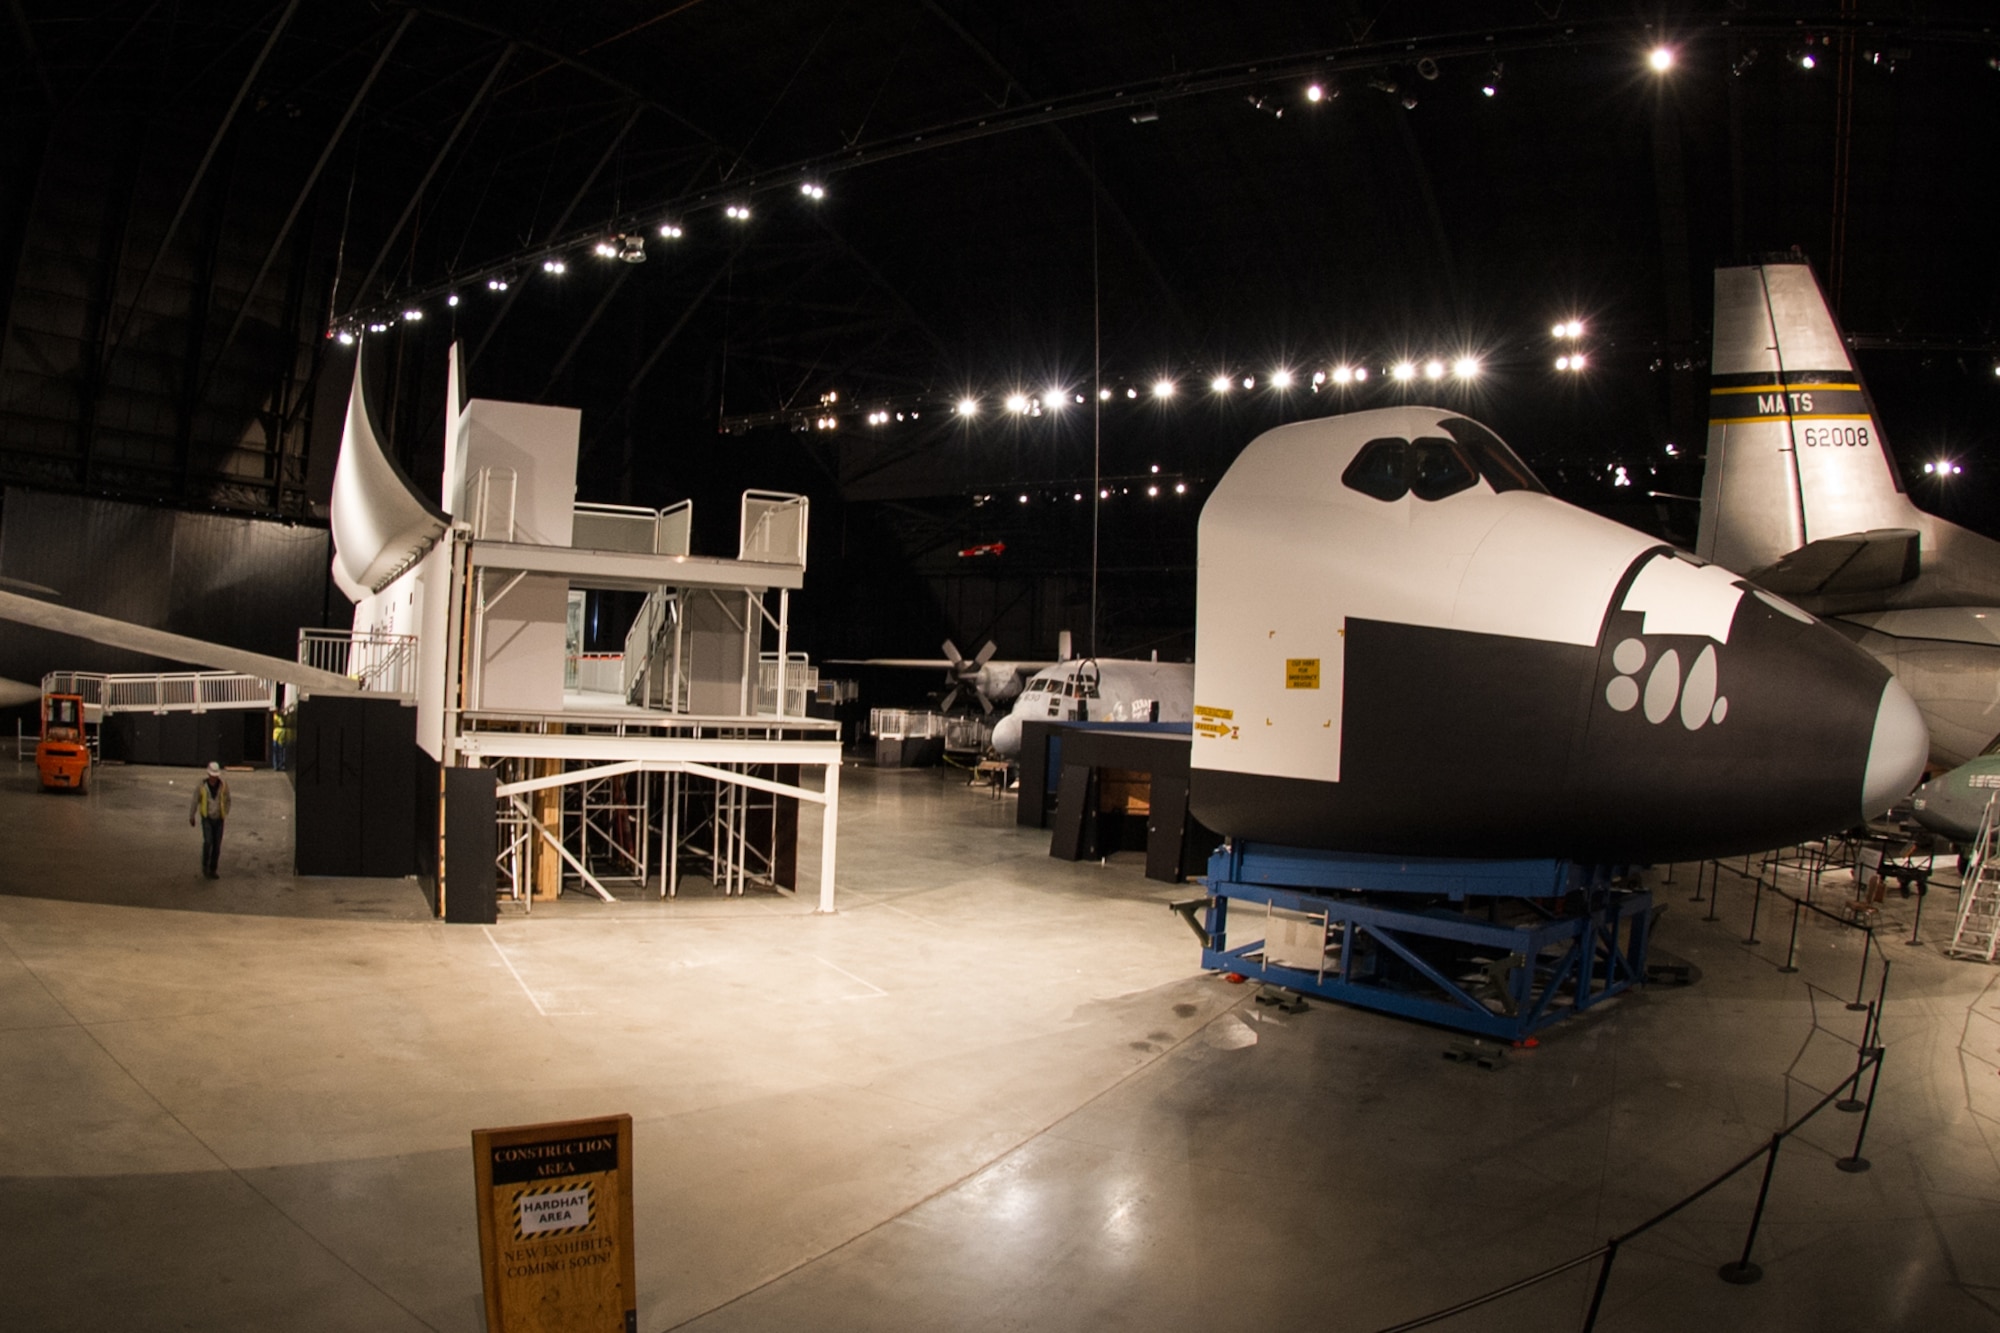 DAYTON, Ohio -- Restoration staff prepare to move the Space Shuttle Exhibit(CCT) into the new fourth building at the National Museum of the U.S. Air Force on Oct. 22, 2015. (U.S. Air Force photo)